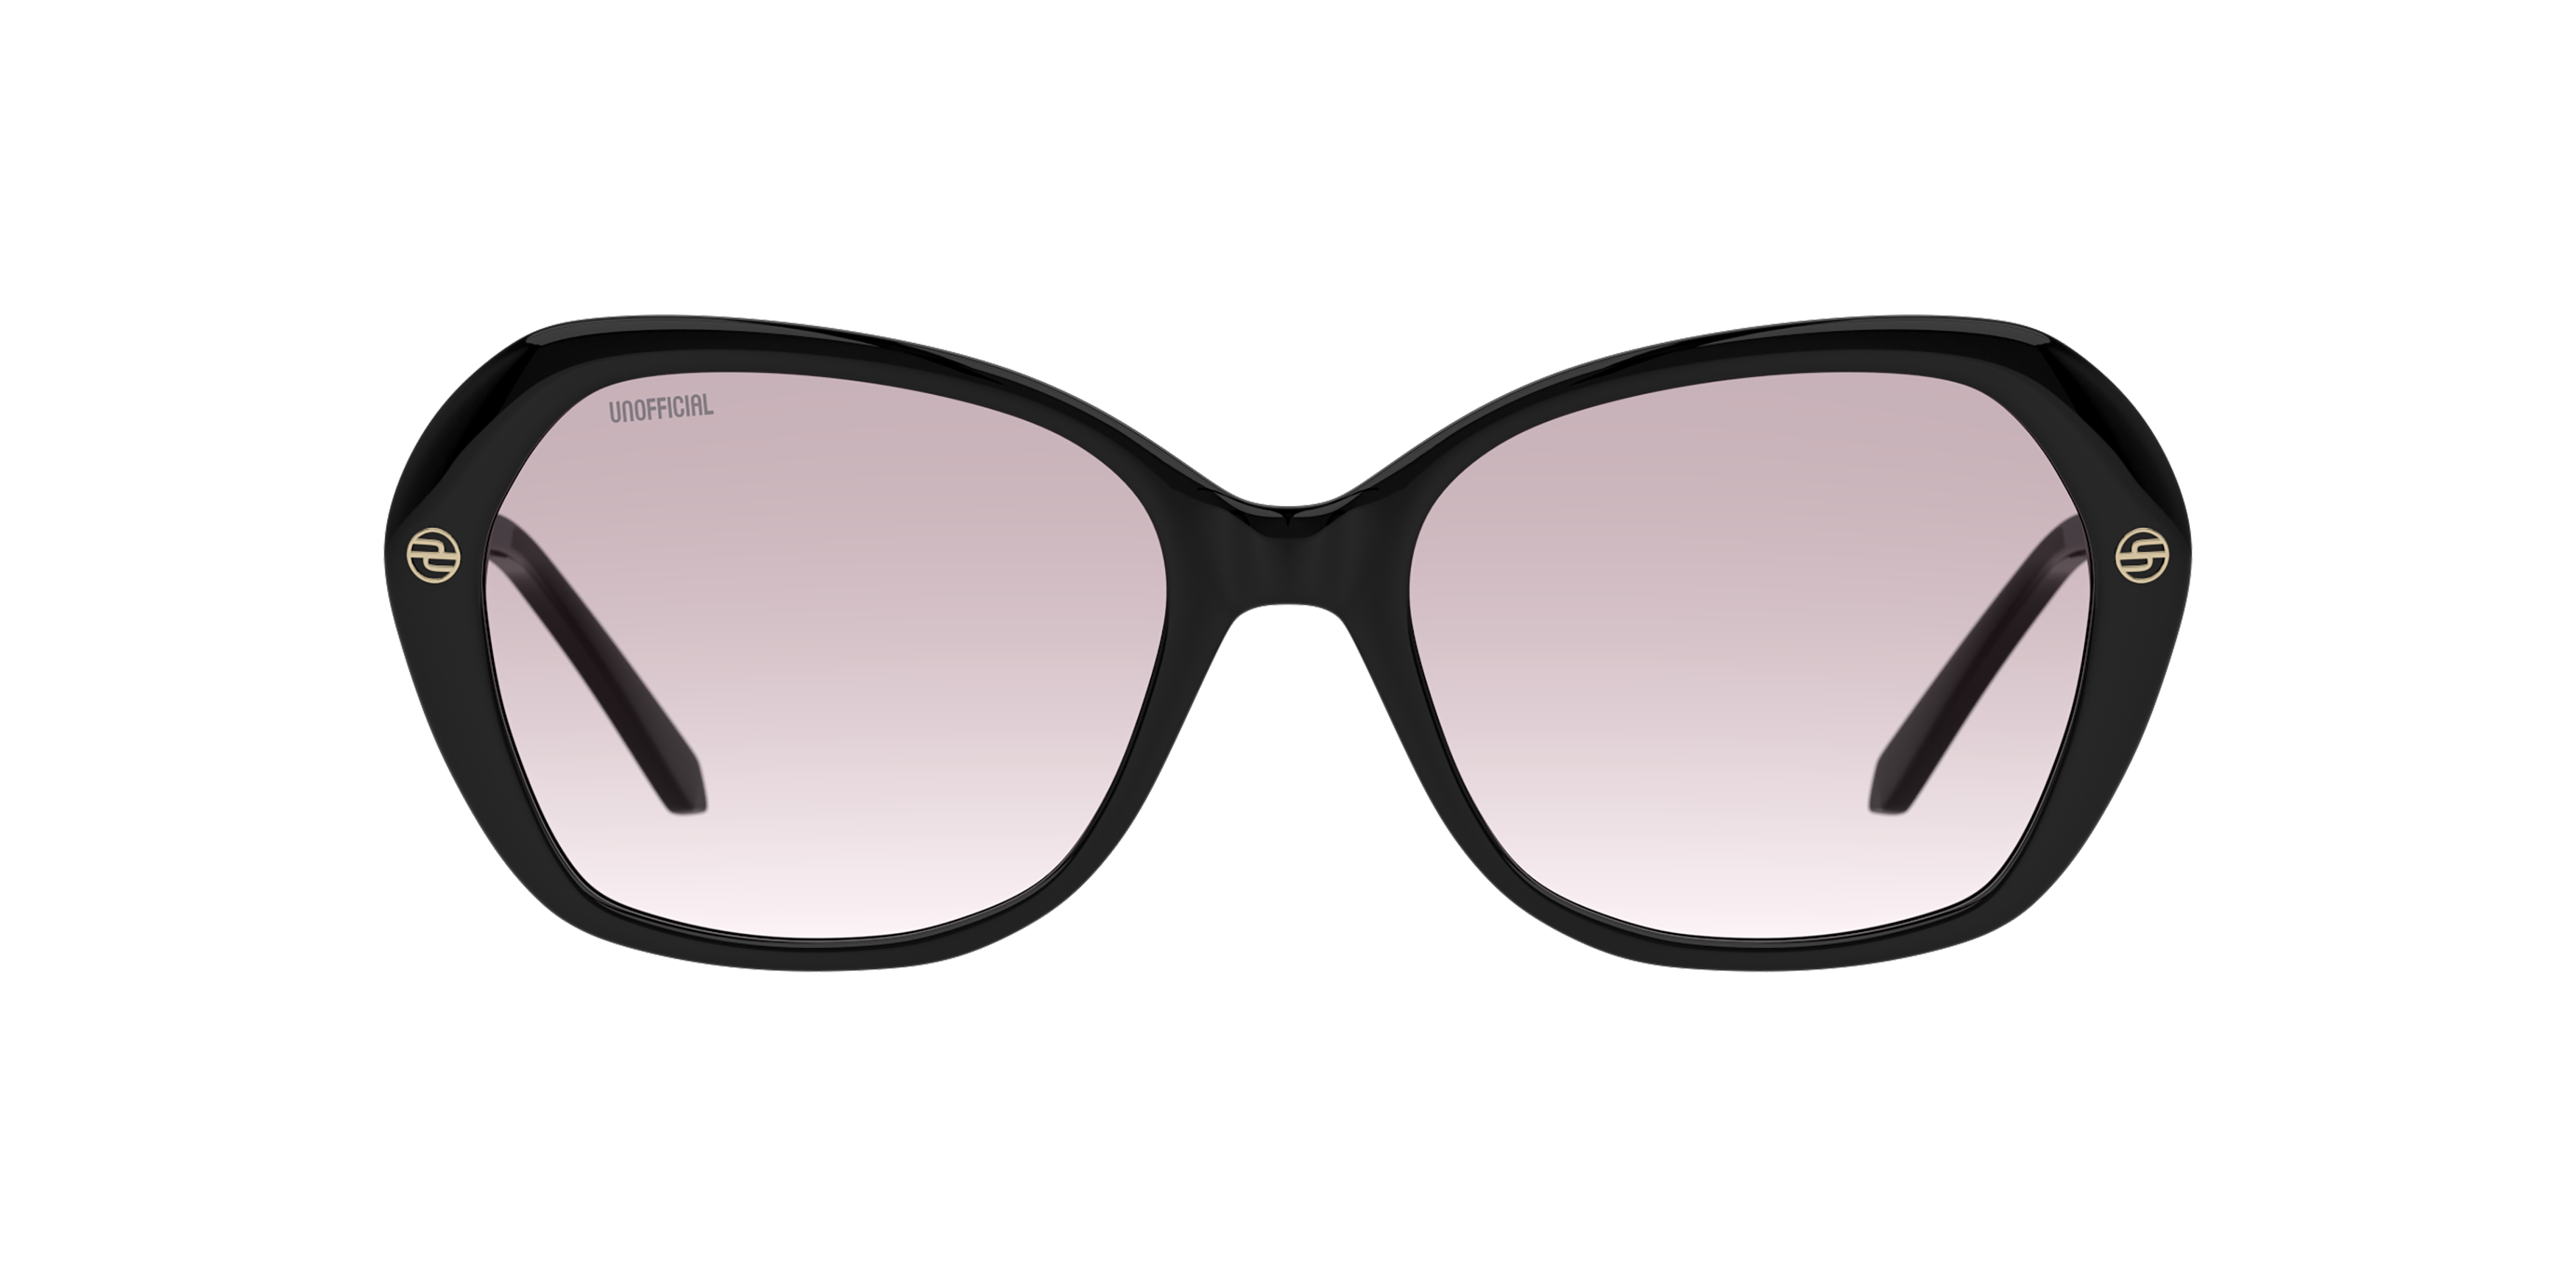 Front Unofficial UNSF0163 (BBG0) Sunglasses Grey / Black